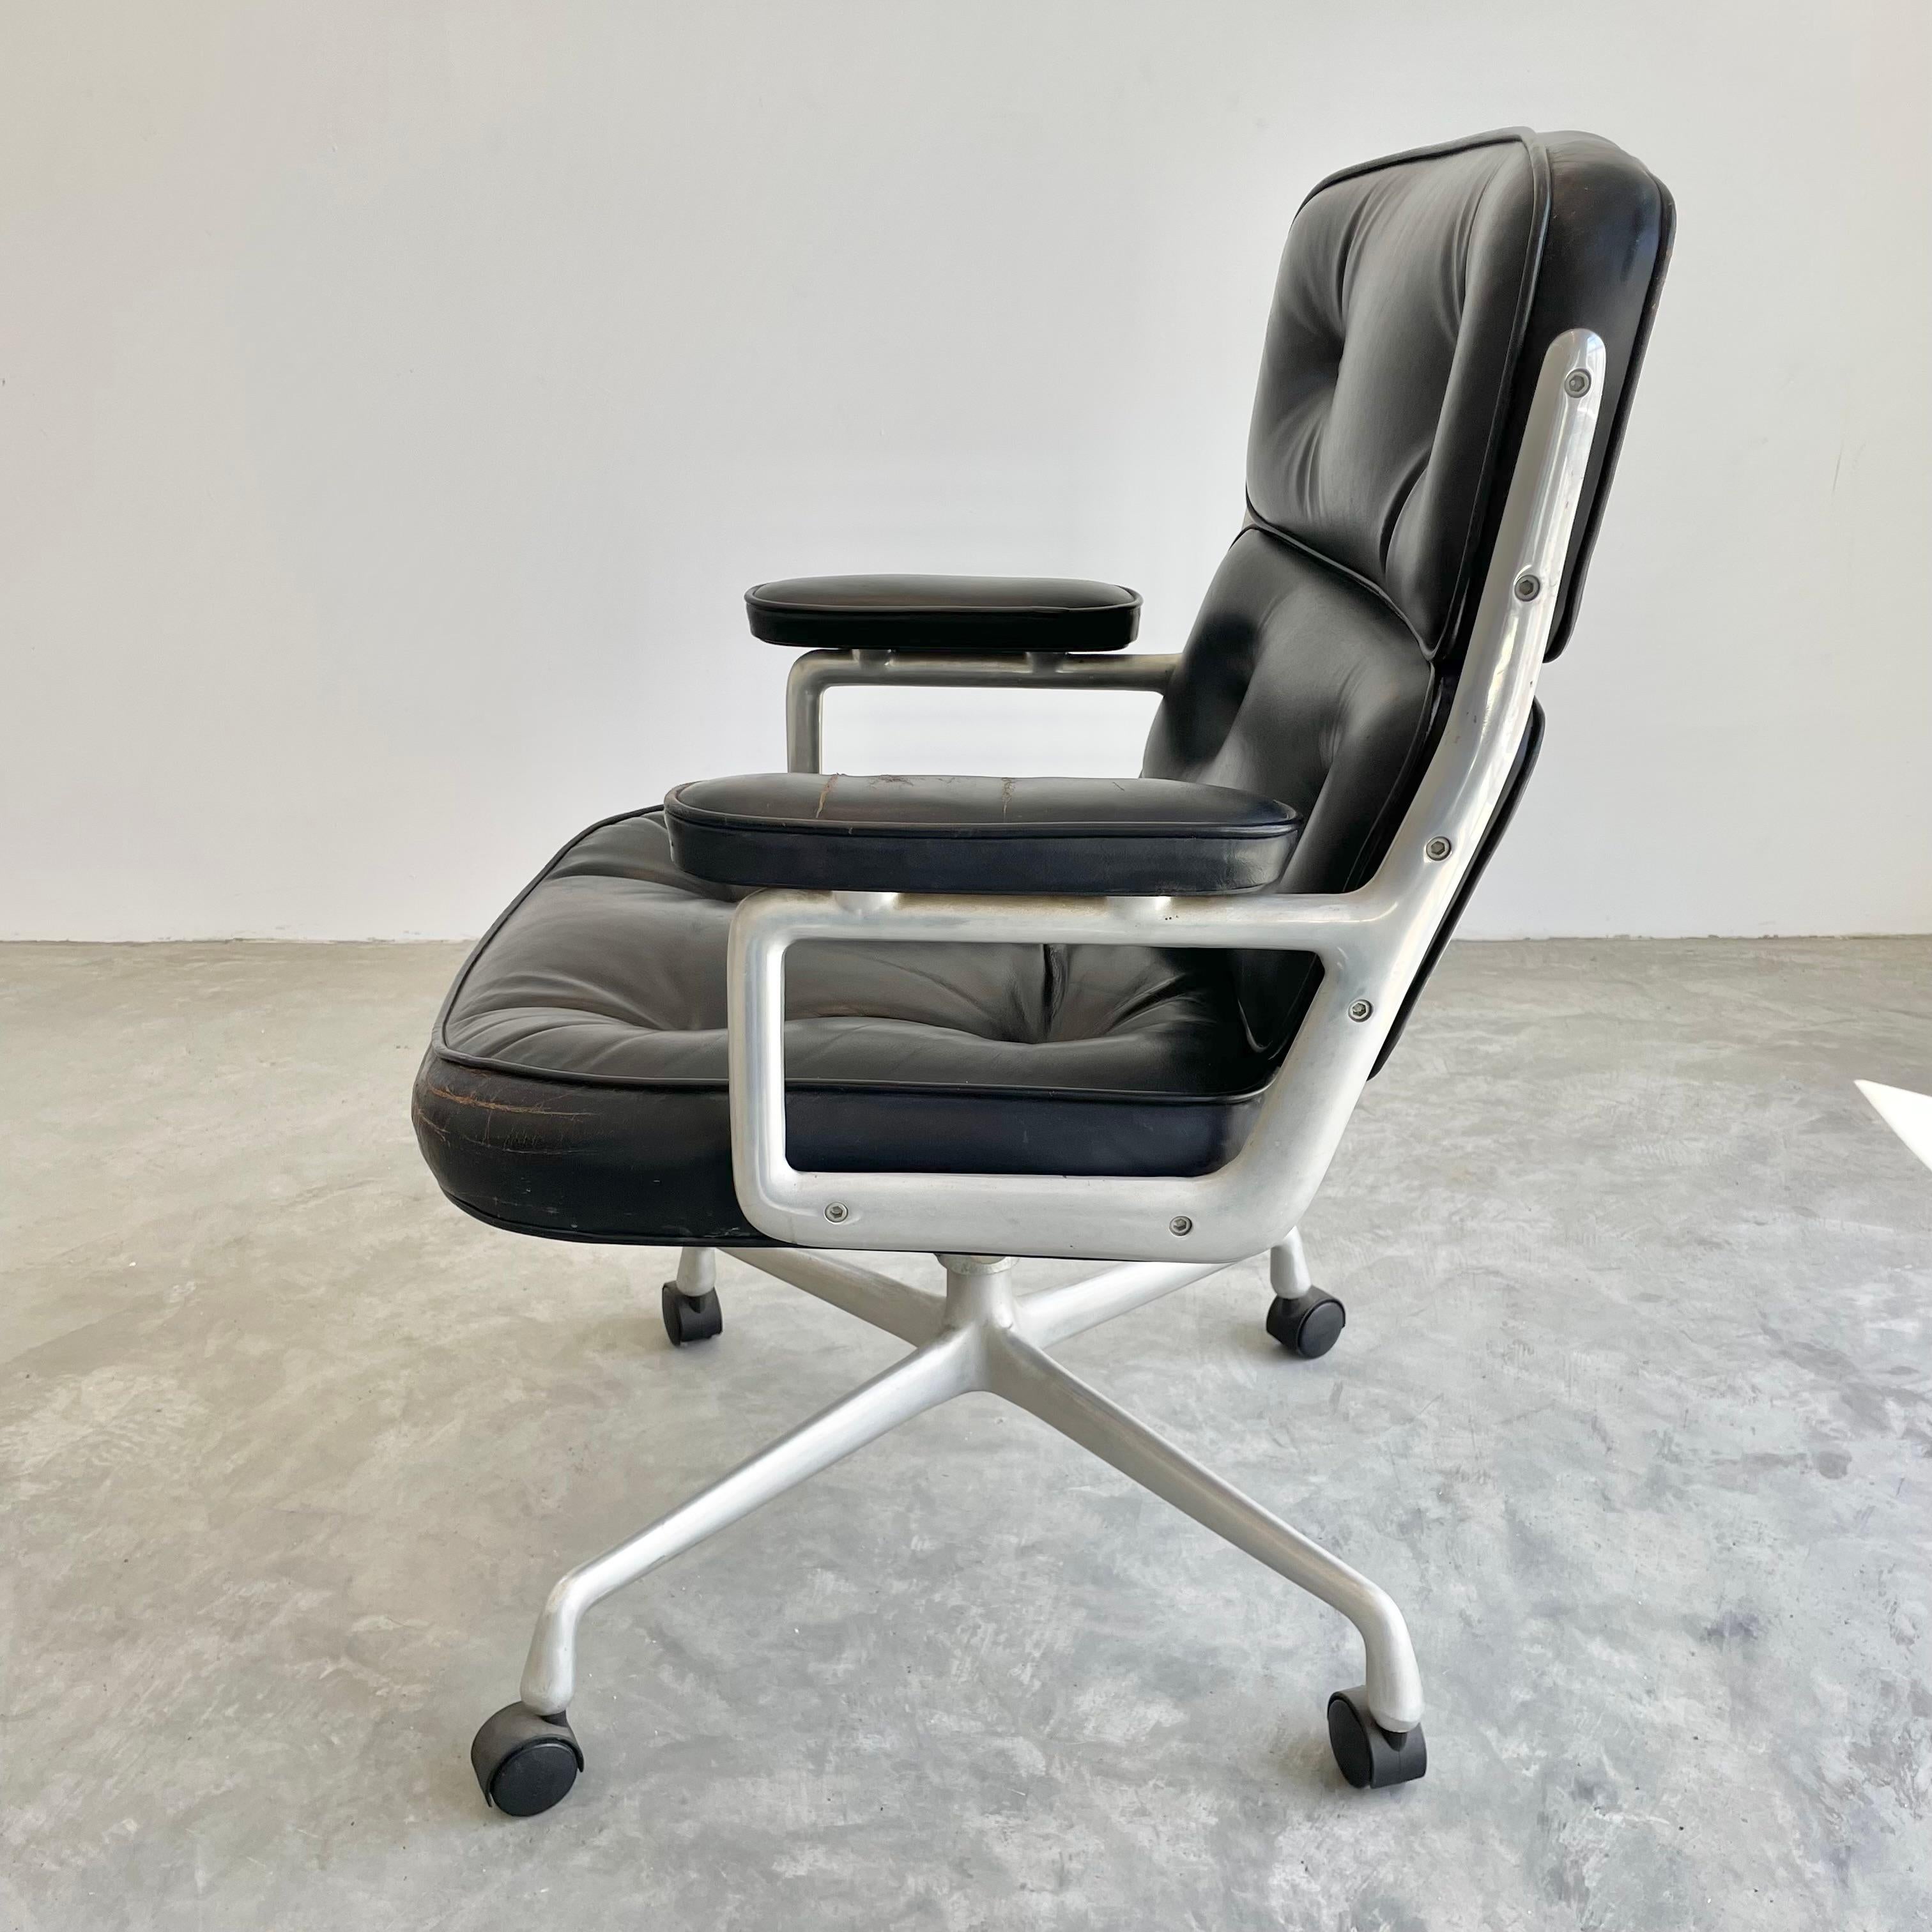 Late 20th Century Eames Time Life Chair in Black Leather for Herman Miller, 1970s USA